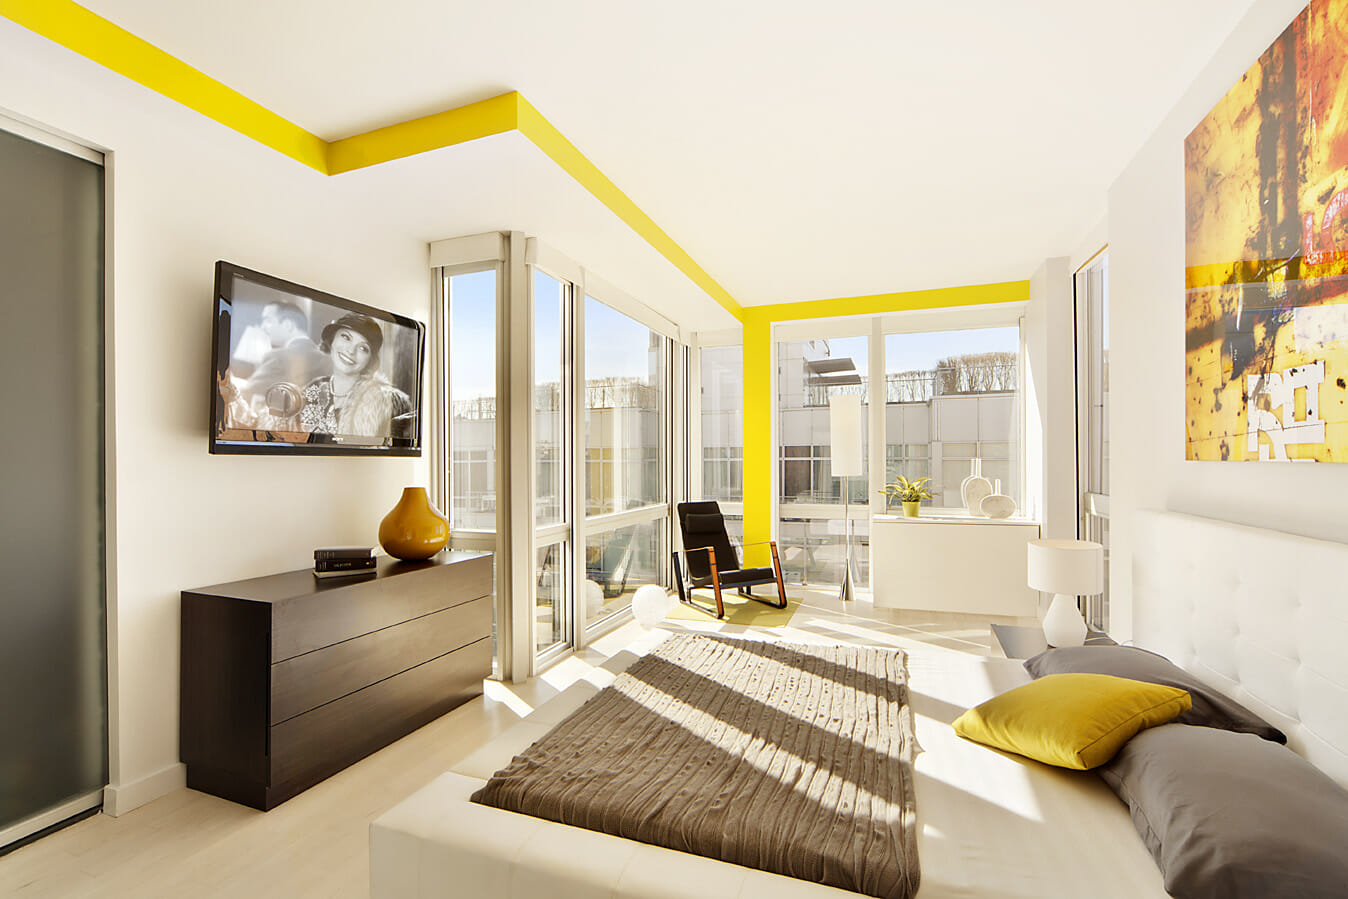 modern interior design with yellow and red